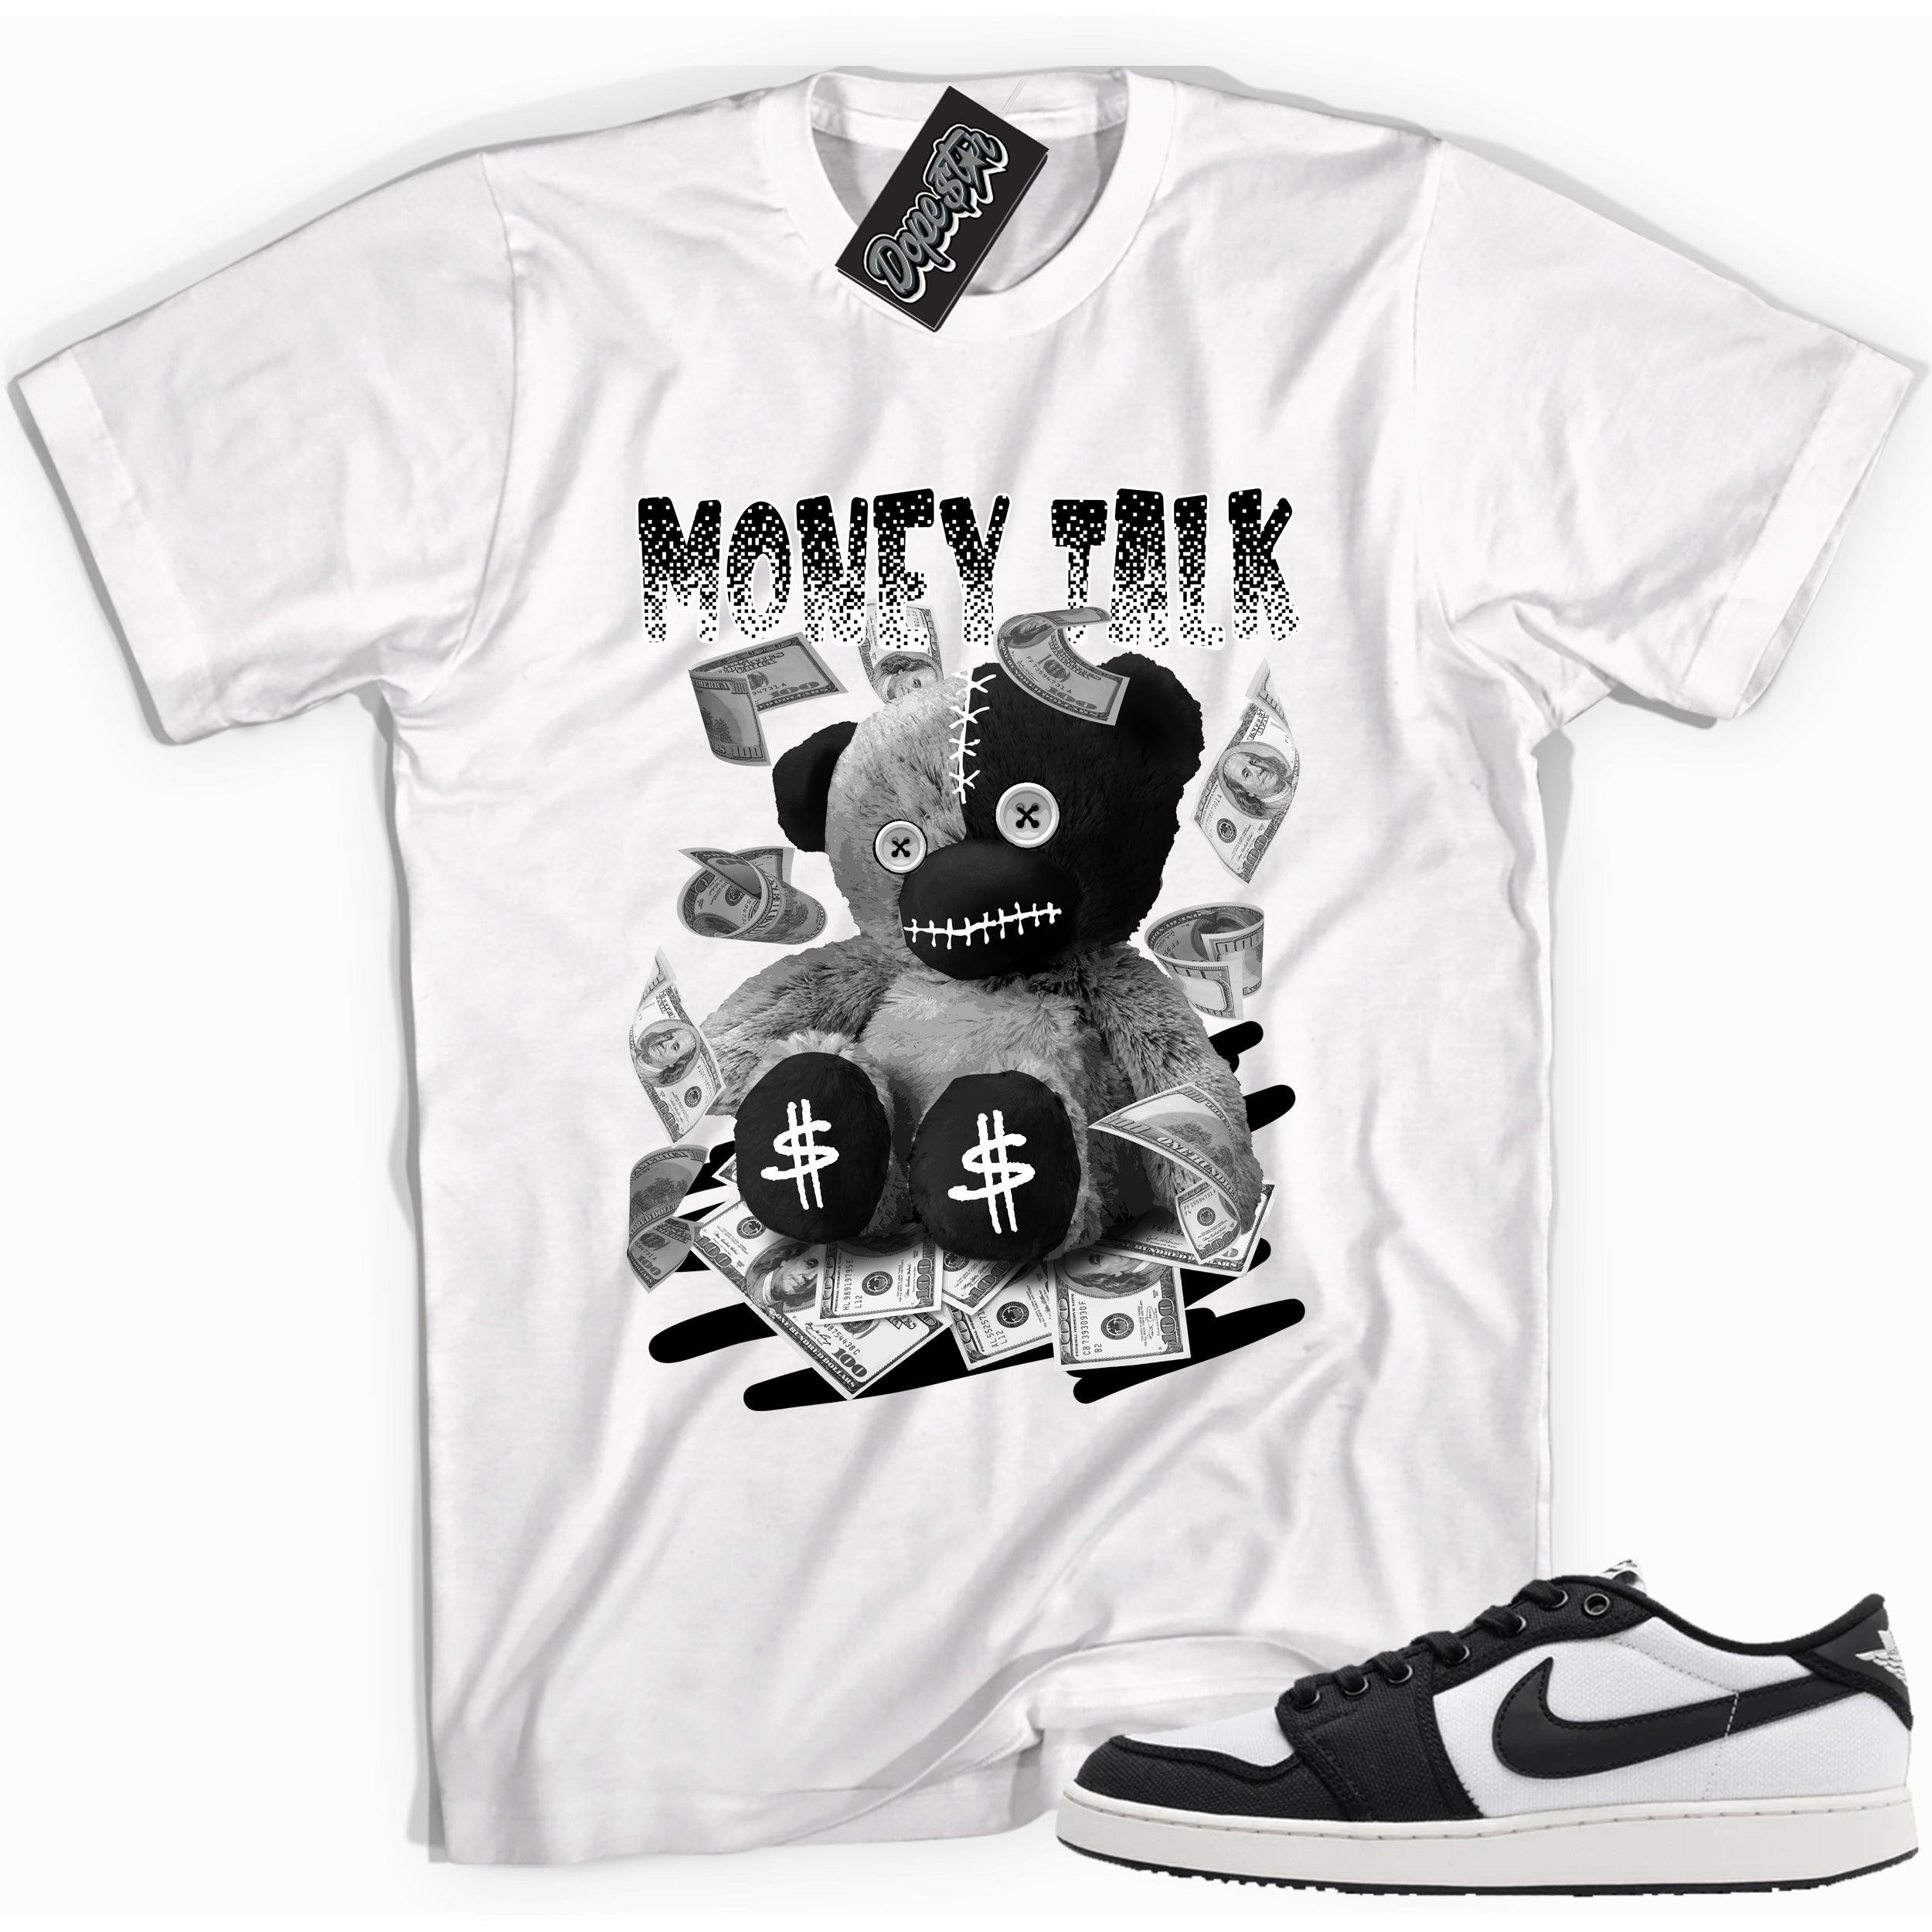 Cool white graphic tee with 'money talk bear' print, that perfectly matches Air Jordan 1 Retro Ajko Low Black & White sneakers.